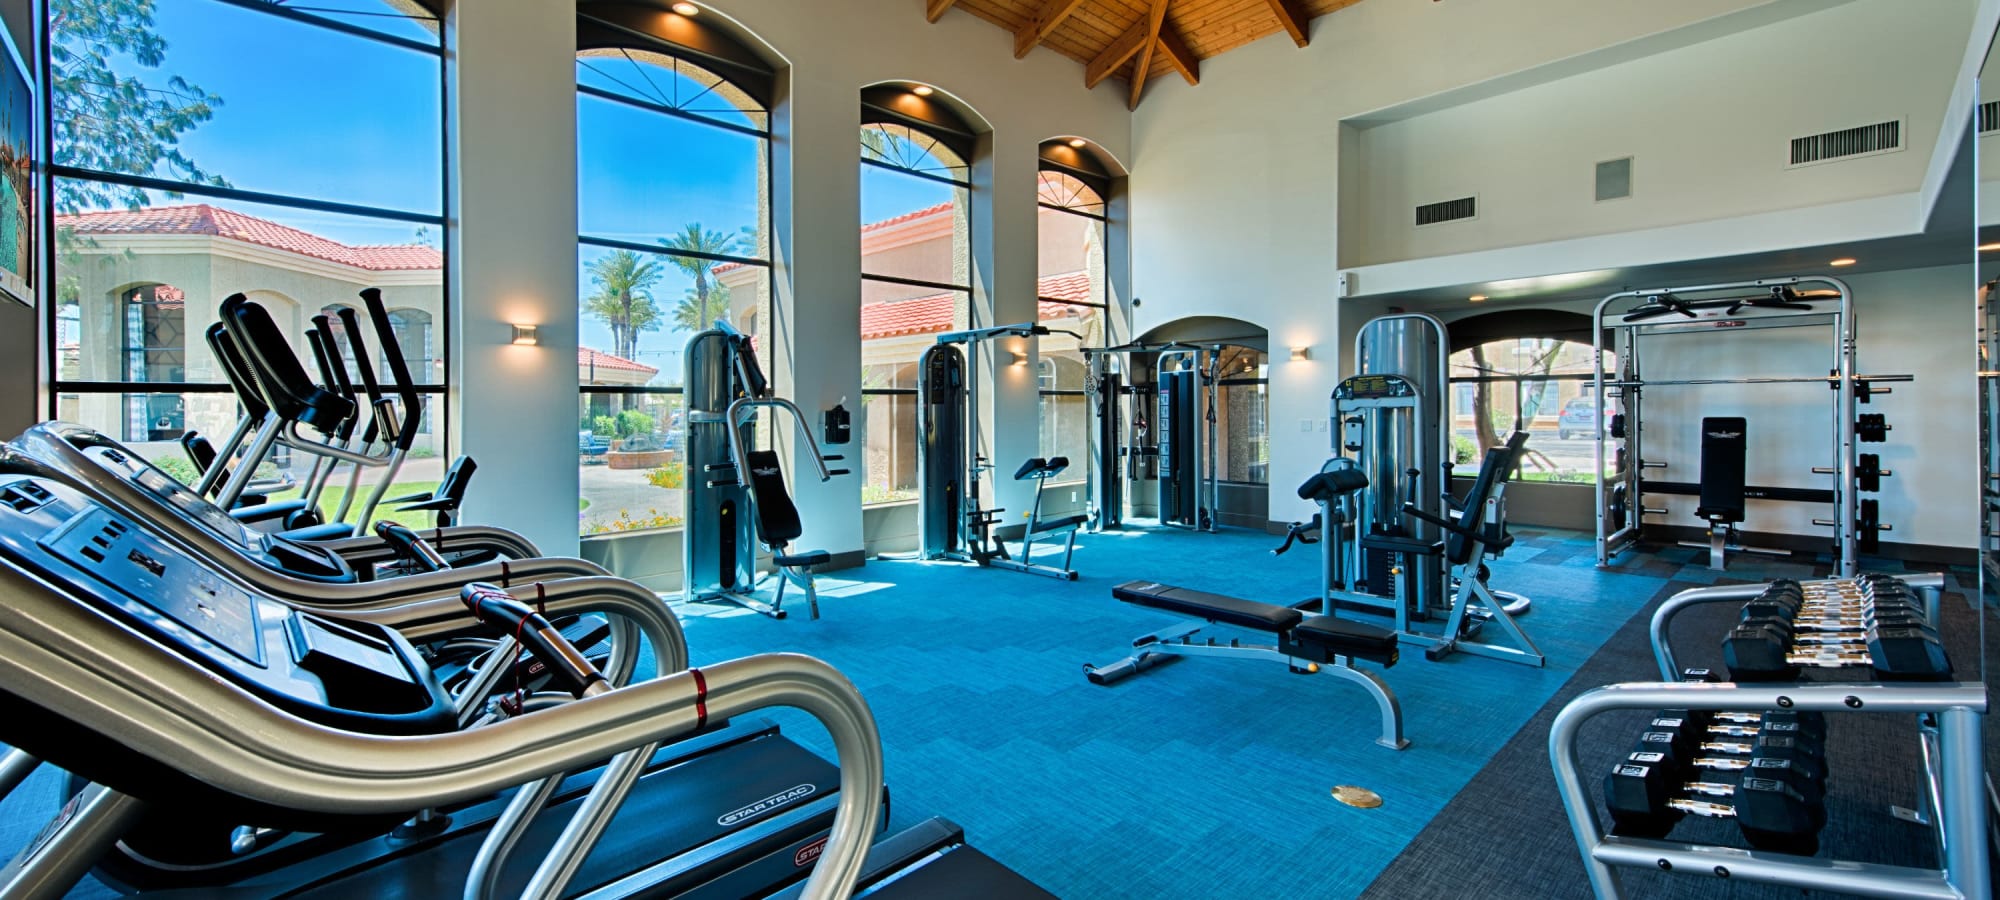 Large fitness center at The Ventura in Chandler, Arizona